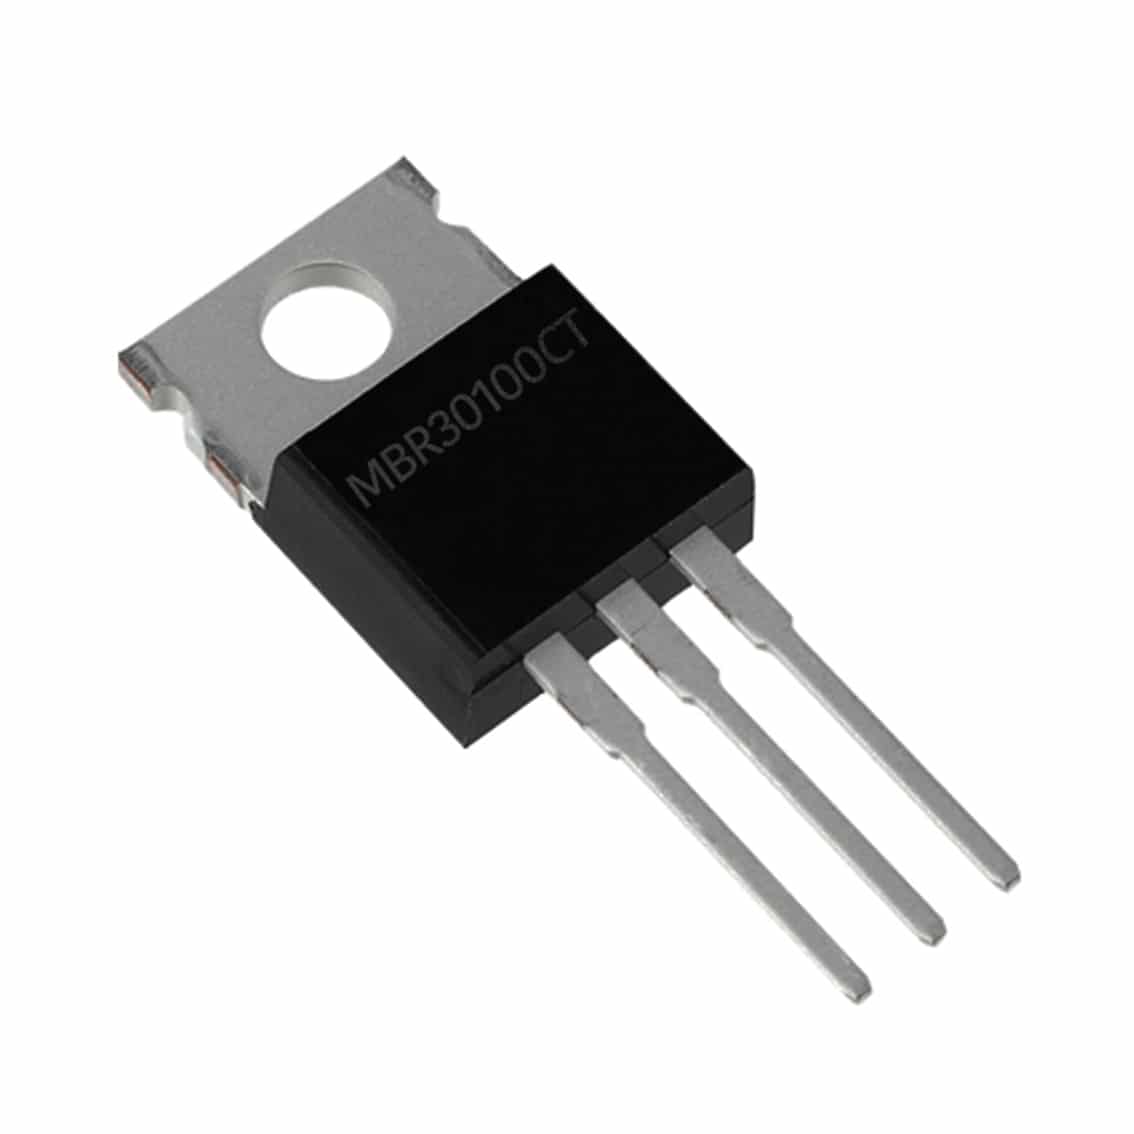 Rectifier Diode Schottky 100V MBR30100CT schottkydioden THT THT 2x15A Diode